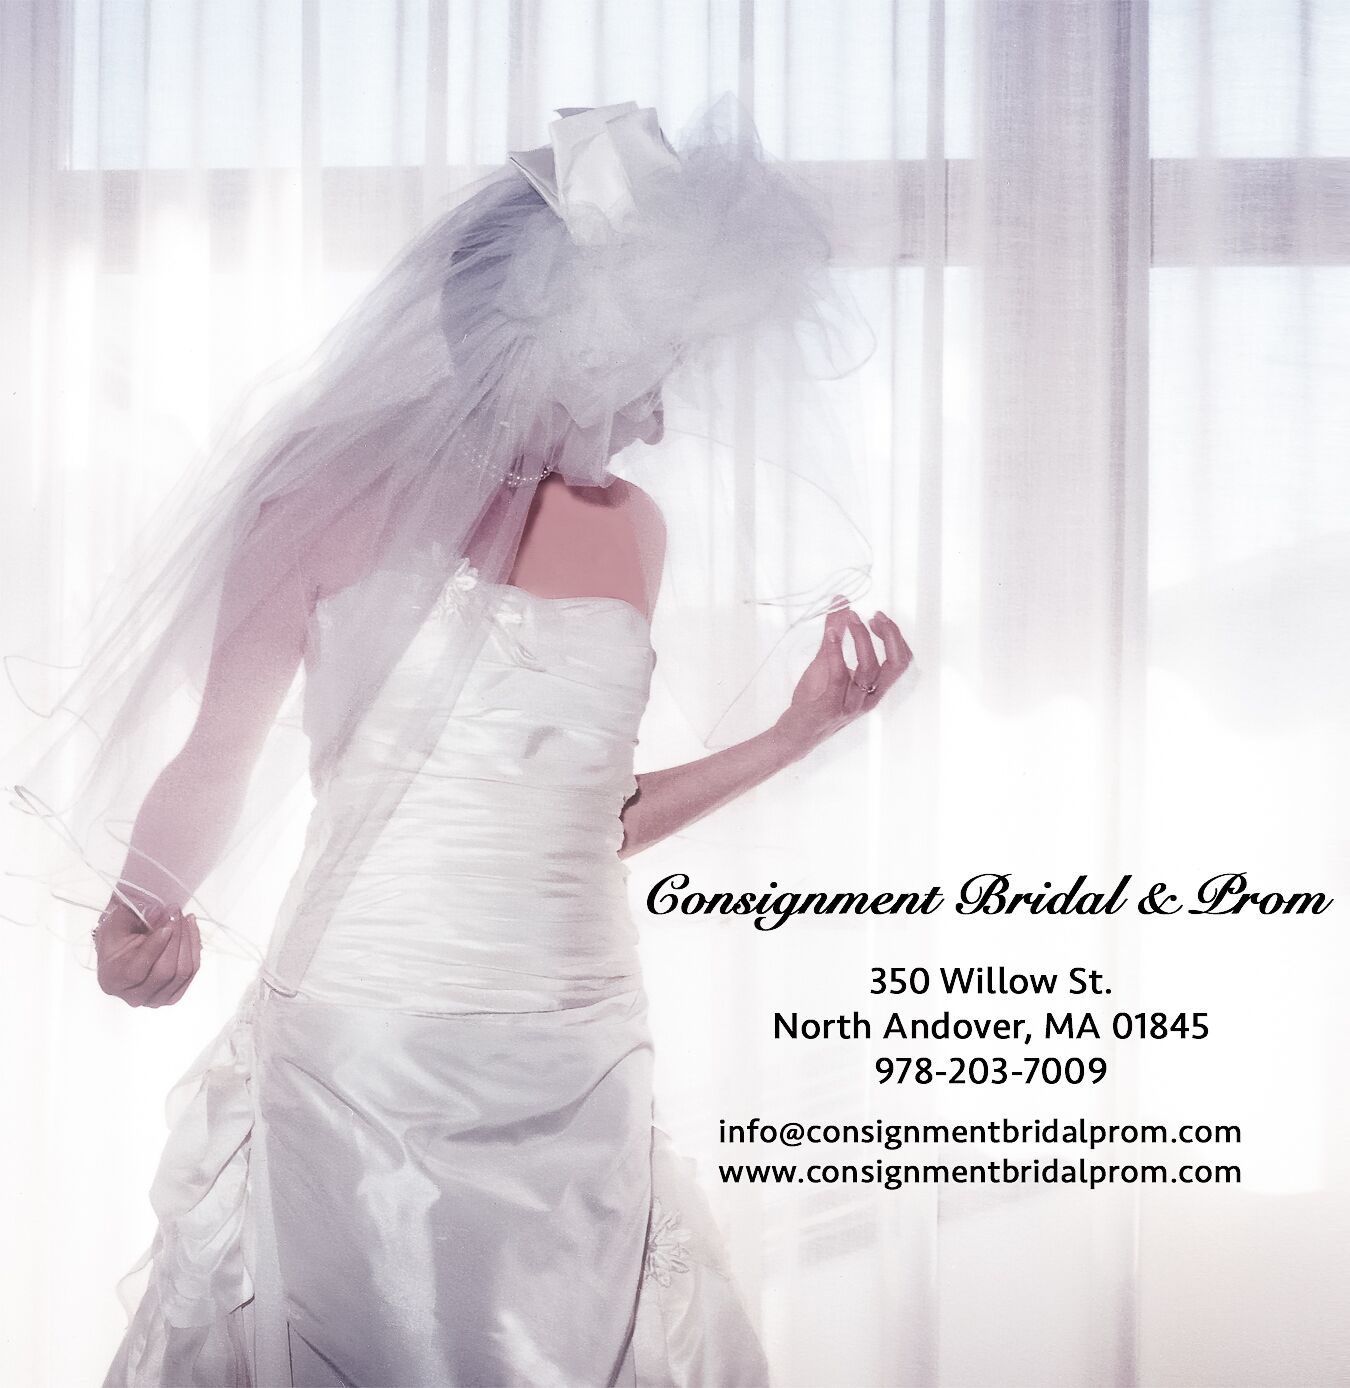 consignment bridal & prom near me